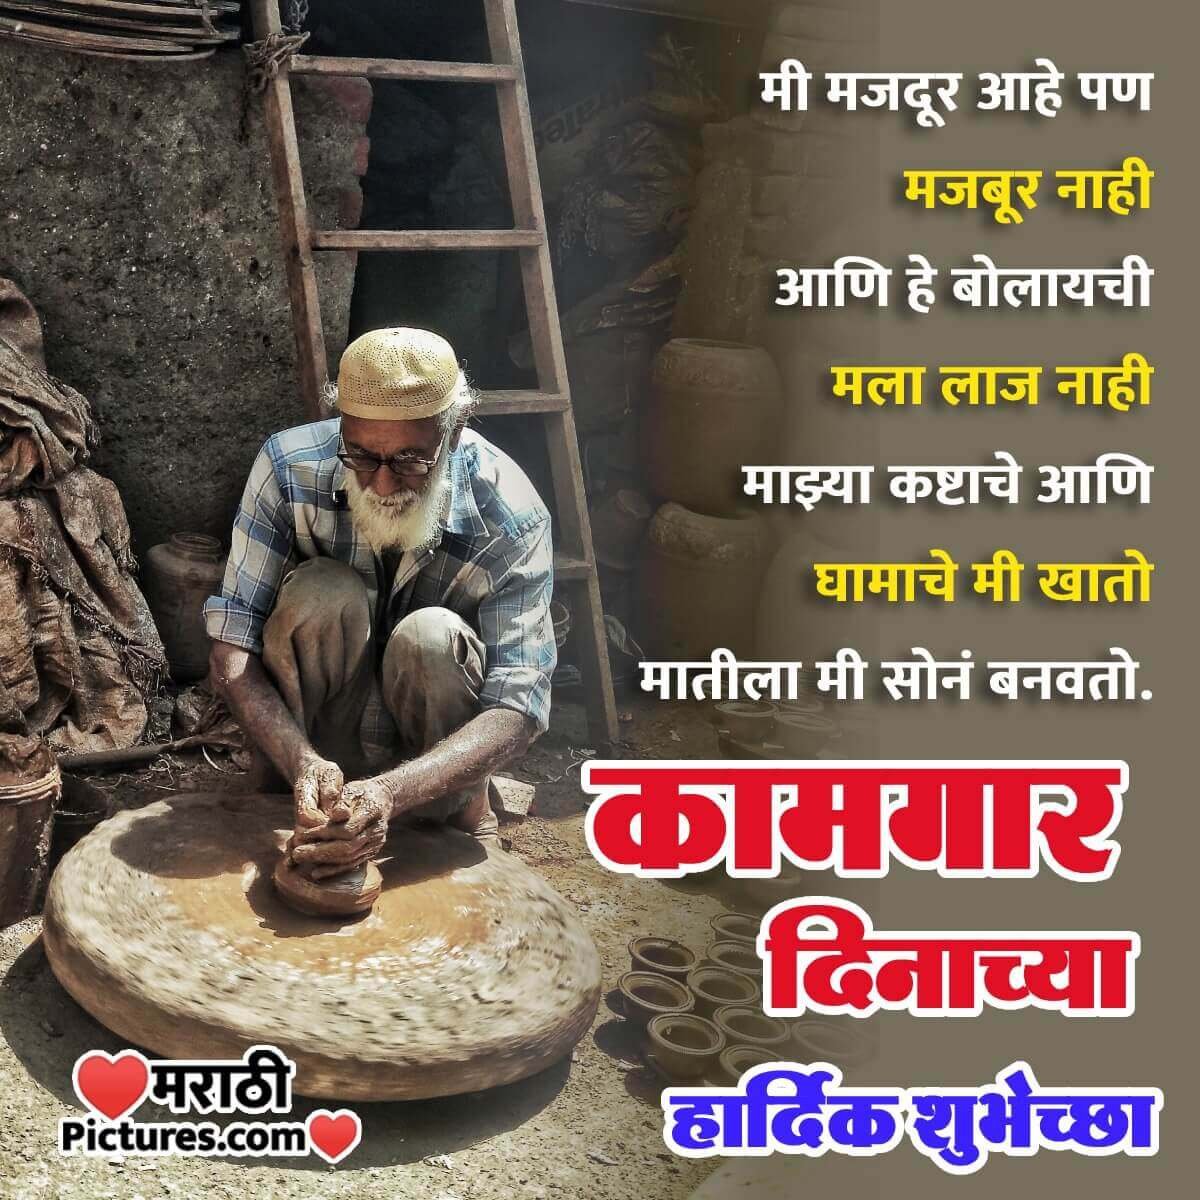 Happy International Workers Day Message Pic